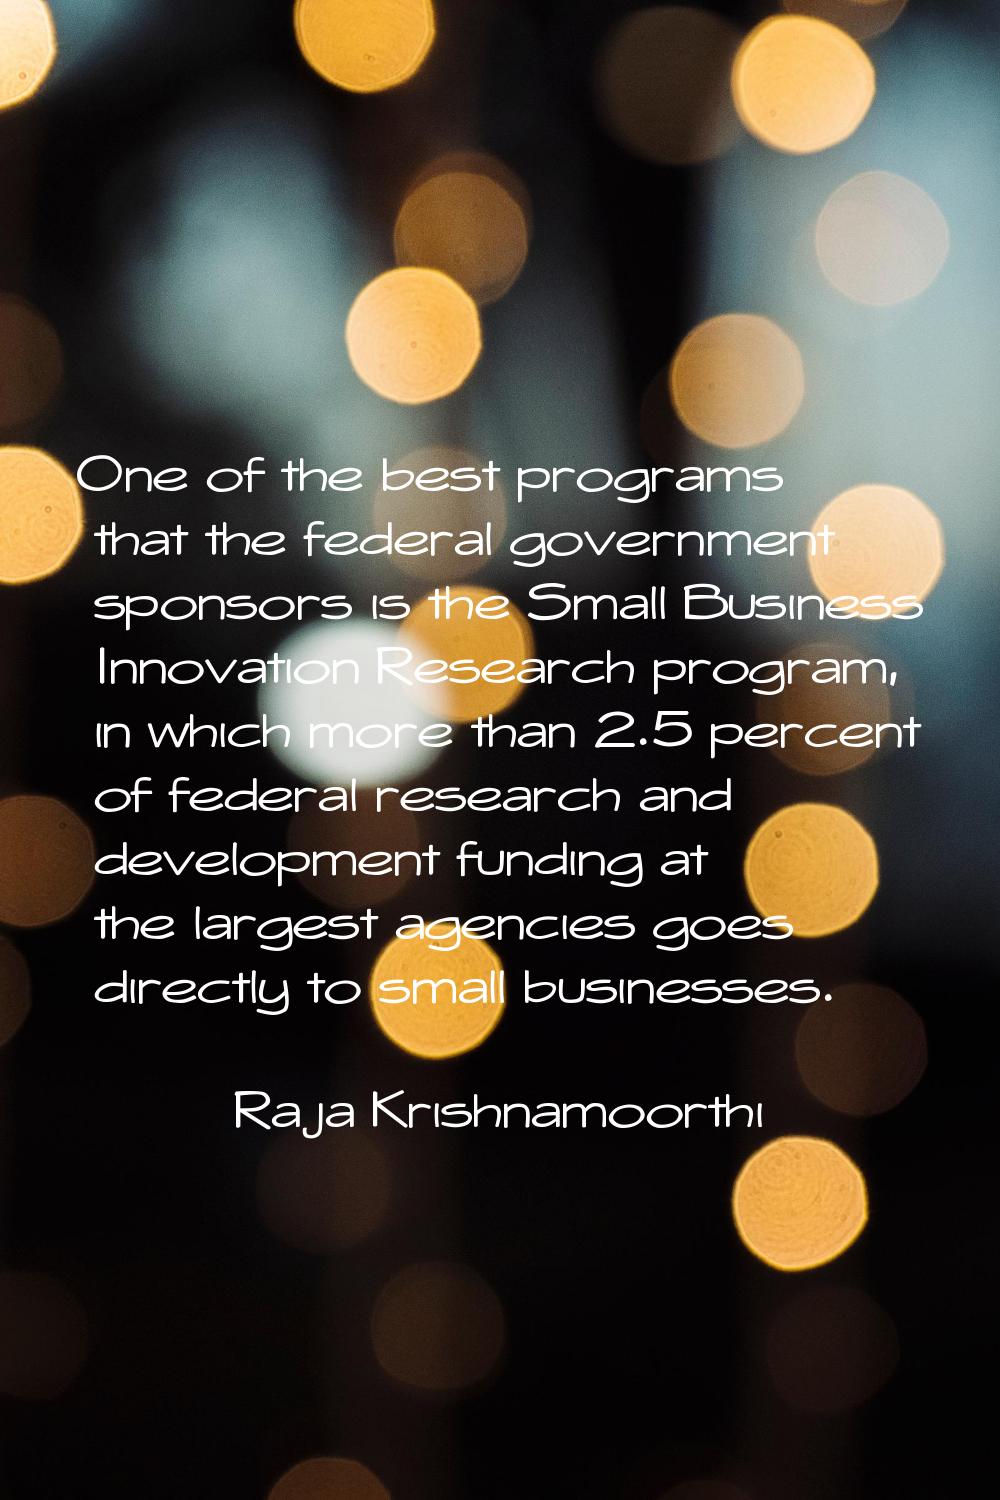 One of the best programs that the federal government sponsors is the Small Business Innovation Rese